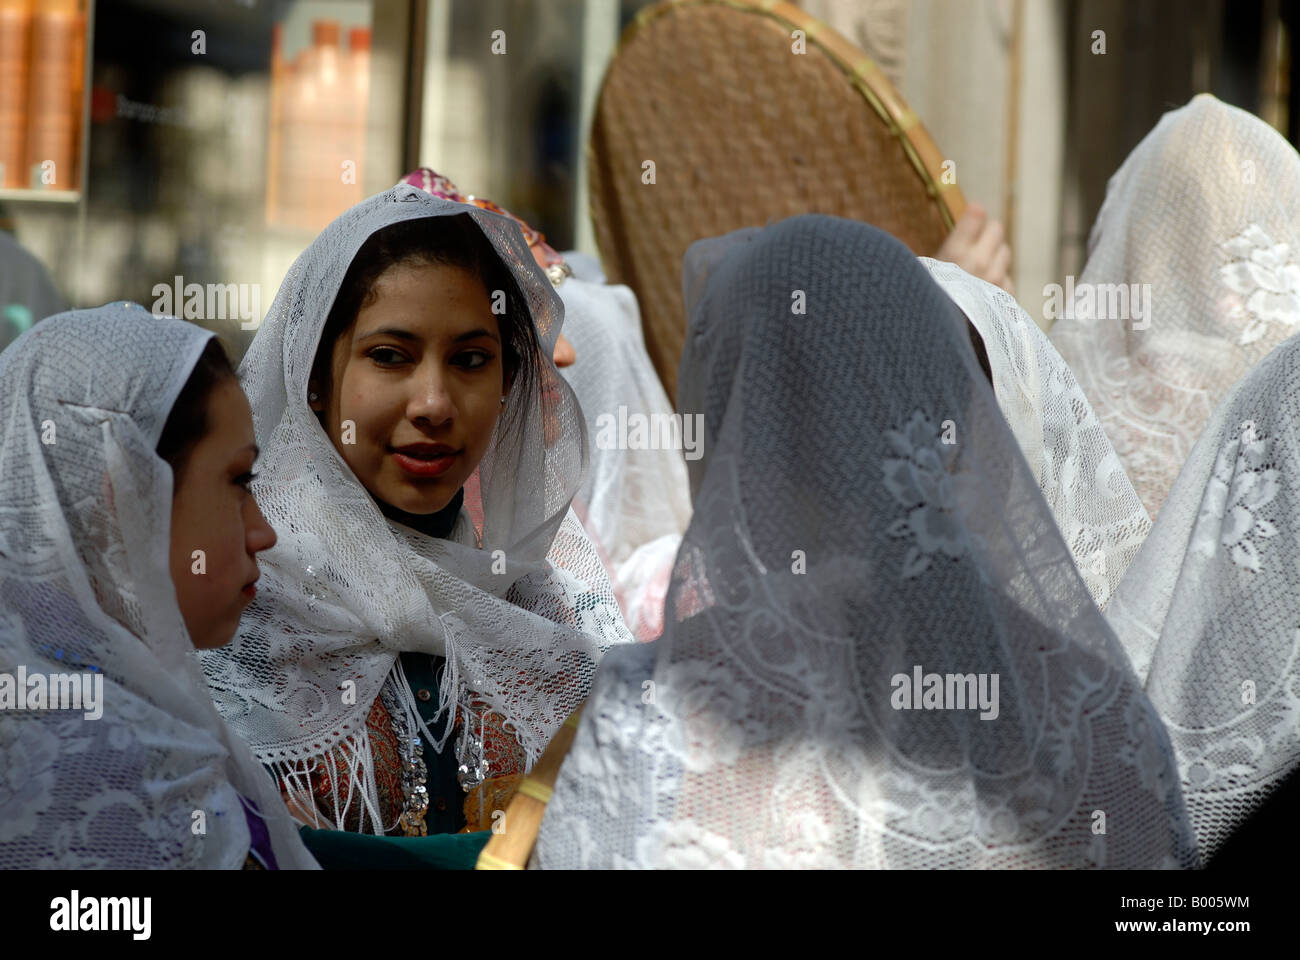 Iranian Americans march and perform in the Fourth Annual Persian Parade on Madison Ave in New York Cit Stock Photo